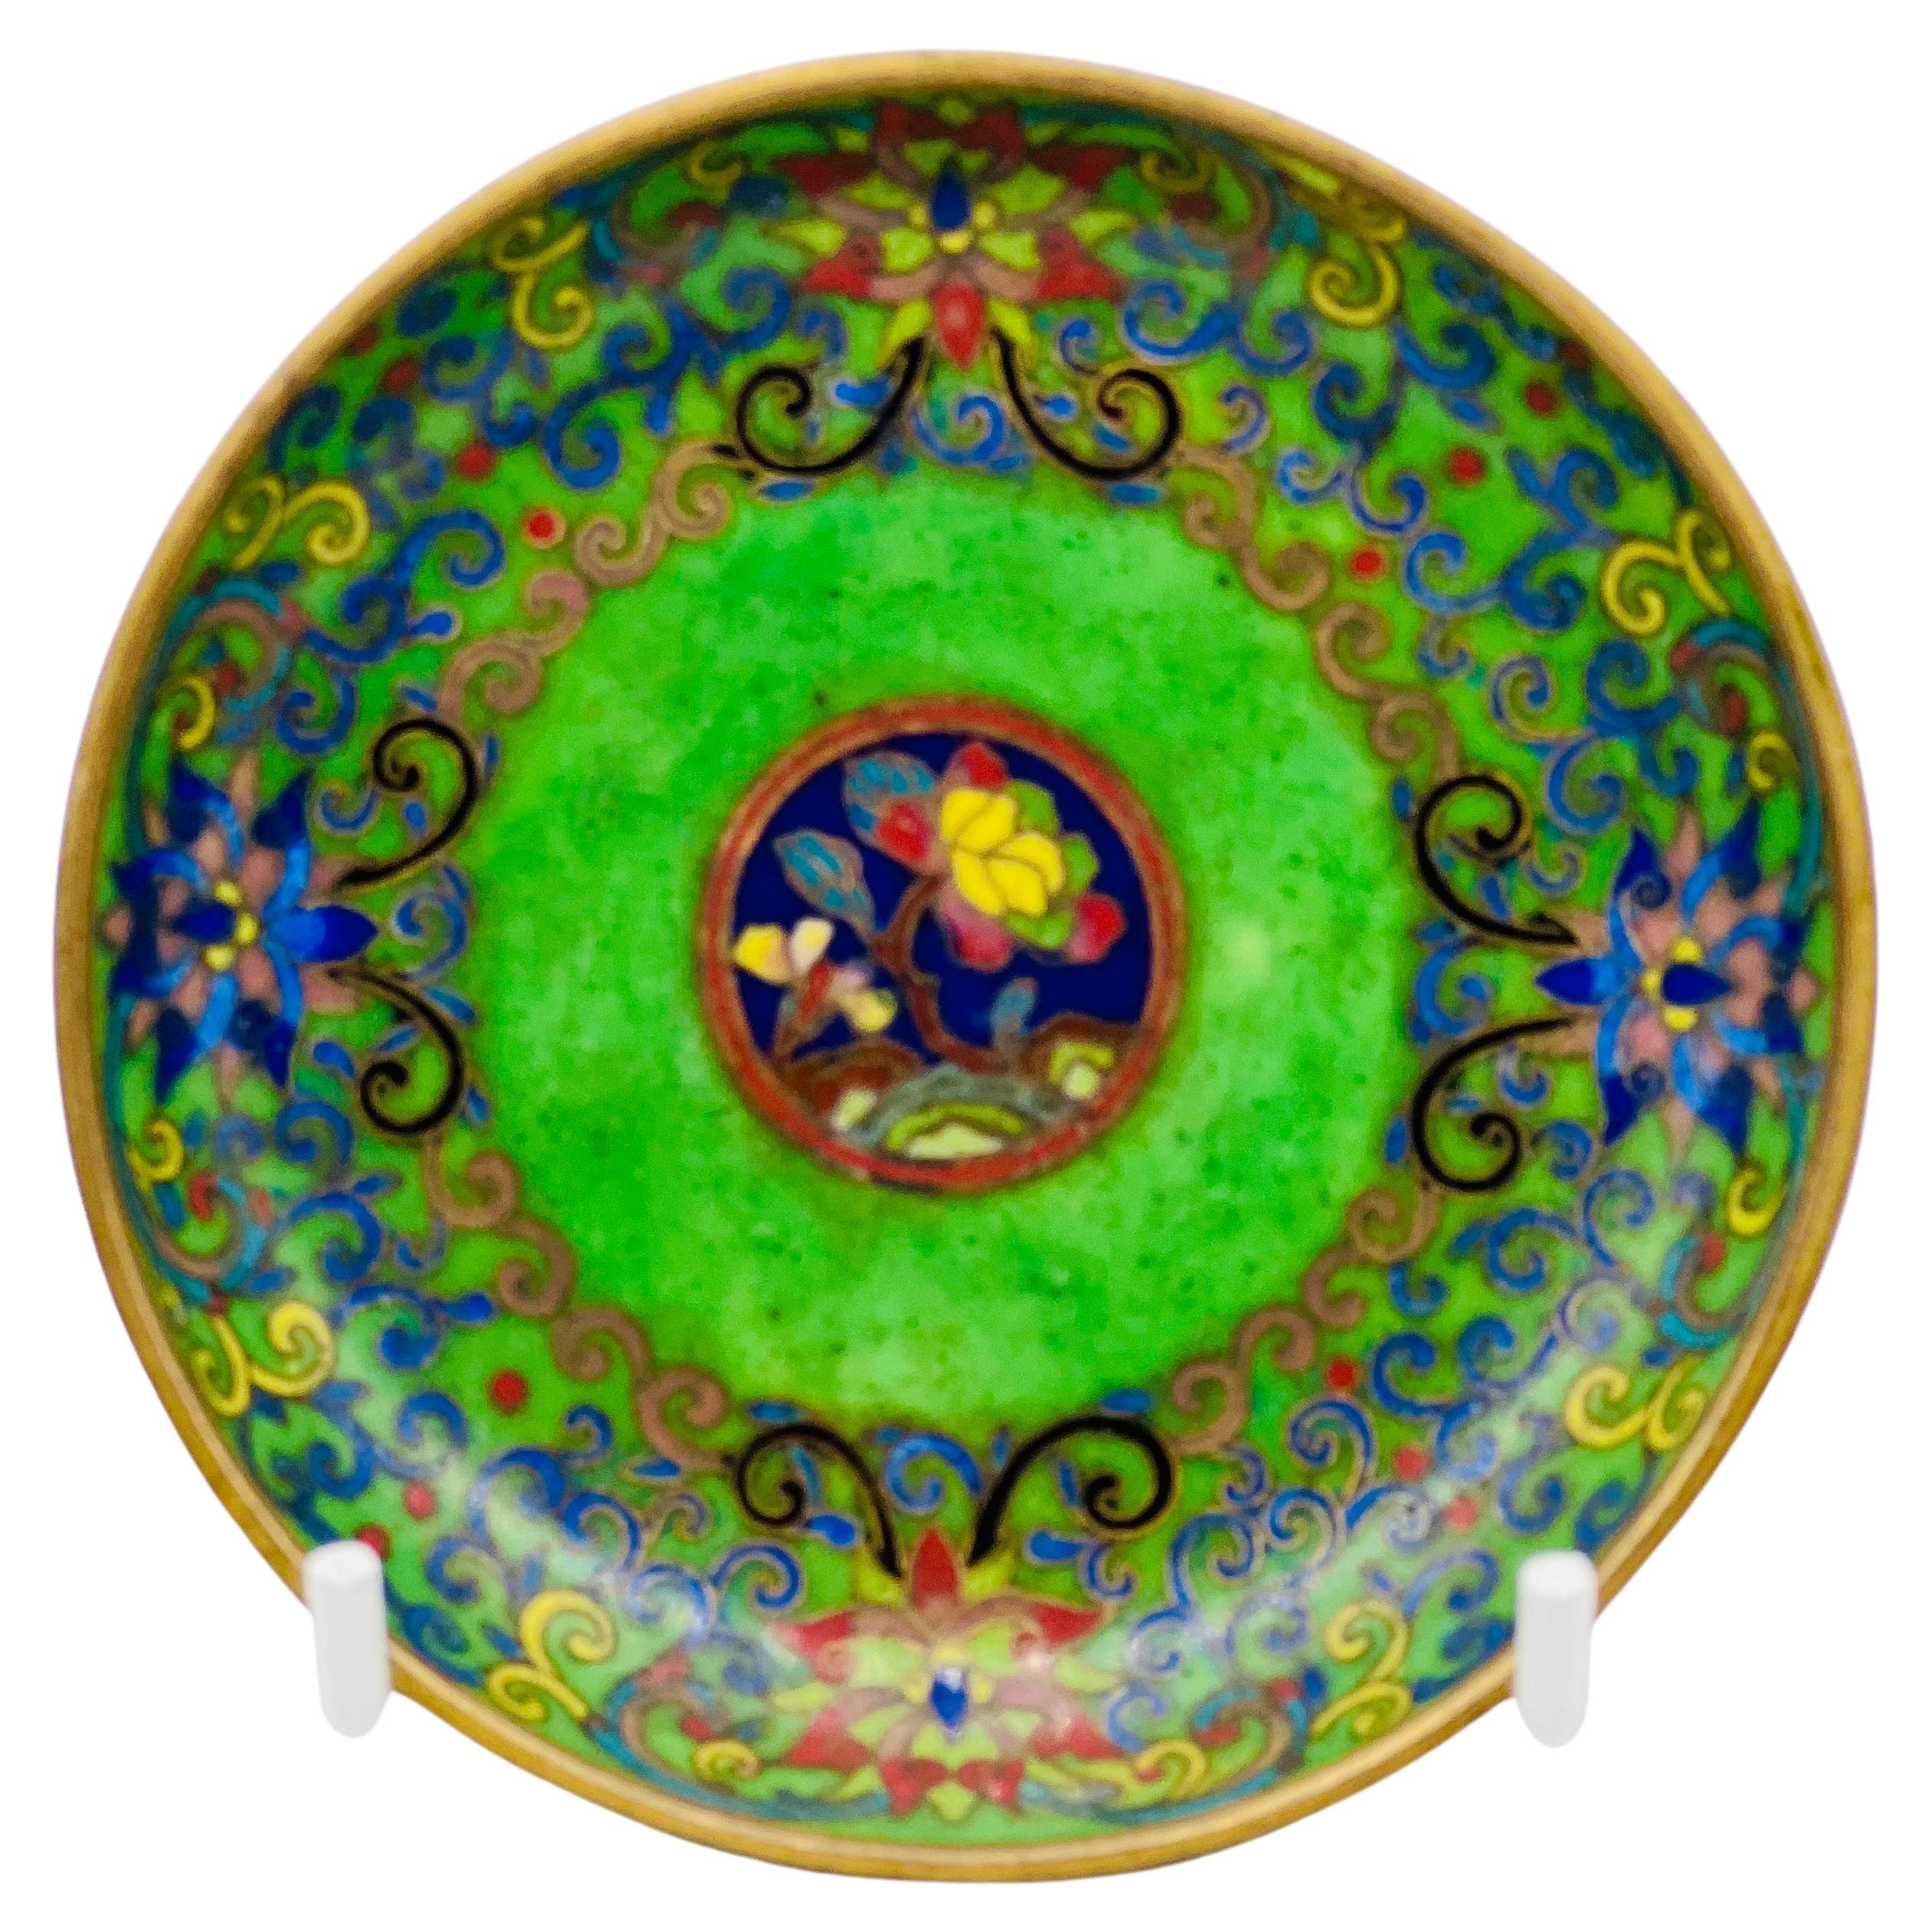 Fine Chinese Cloisonne Enamel Plate / Dish / Tray, 19th Century